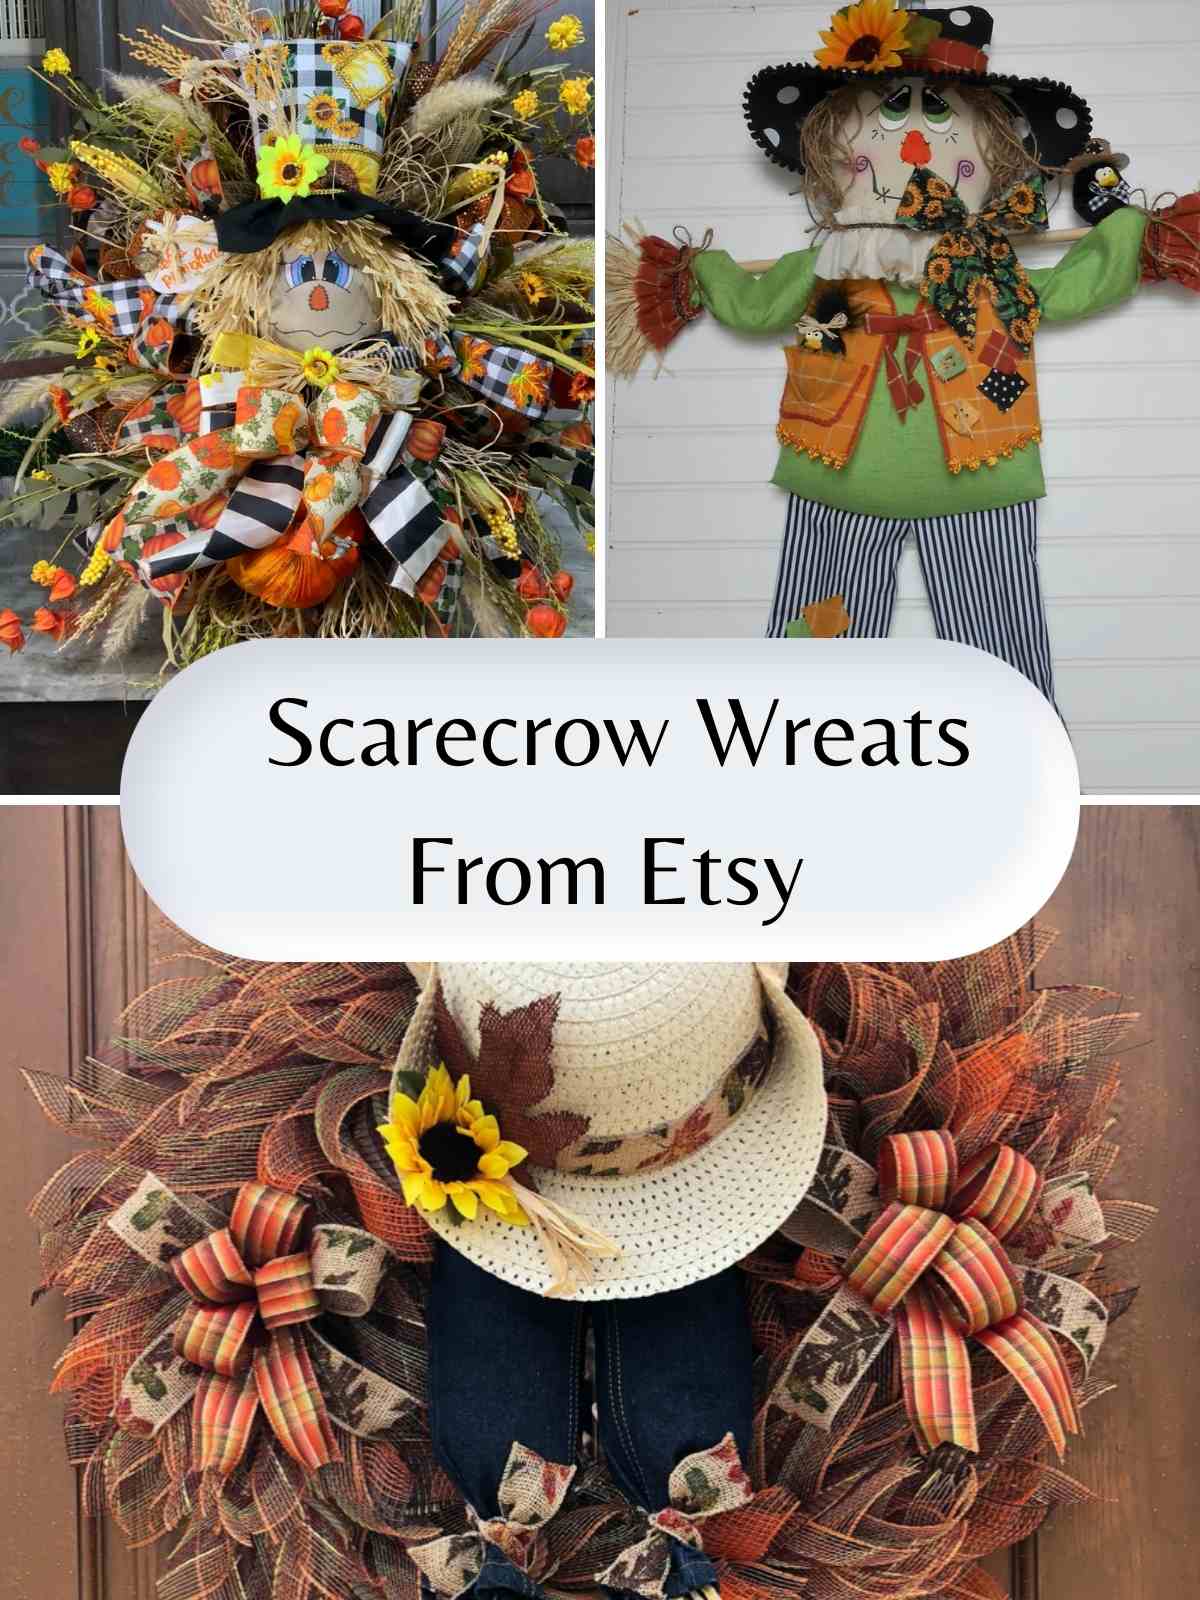 Scarecrow Wreaths to Buy